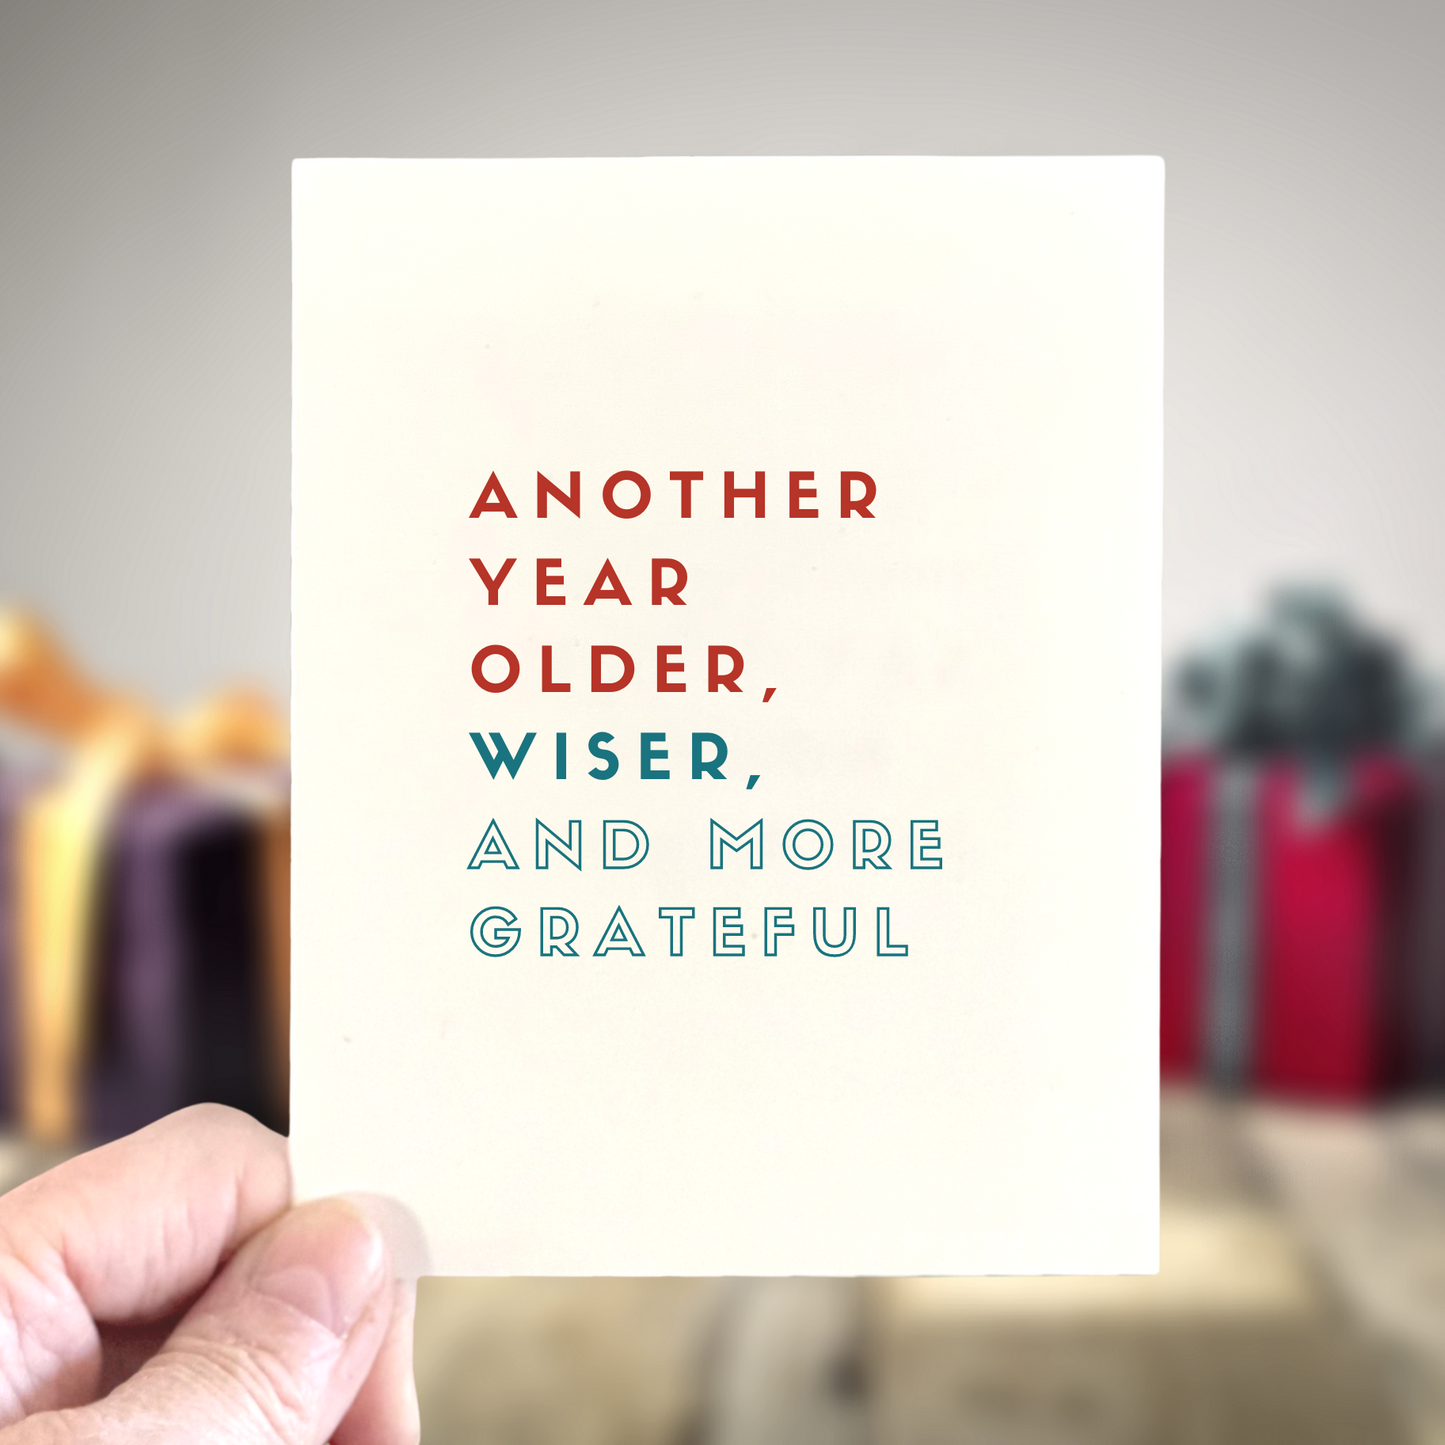 Another Year Older, Wiser, and More Grateful, Age-Positive Birthday Card